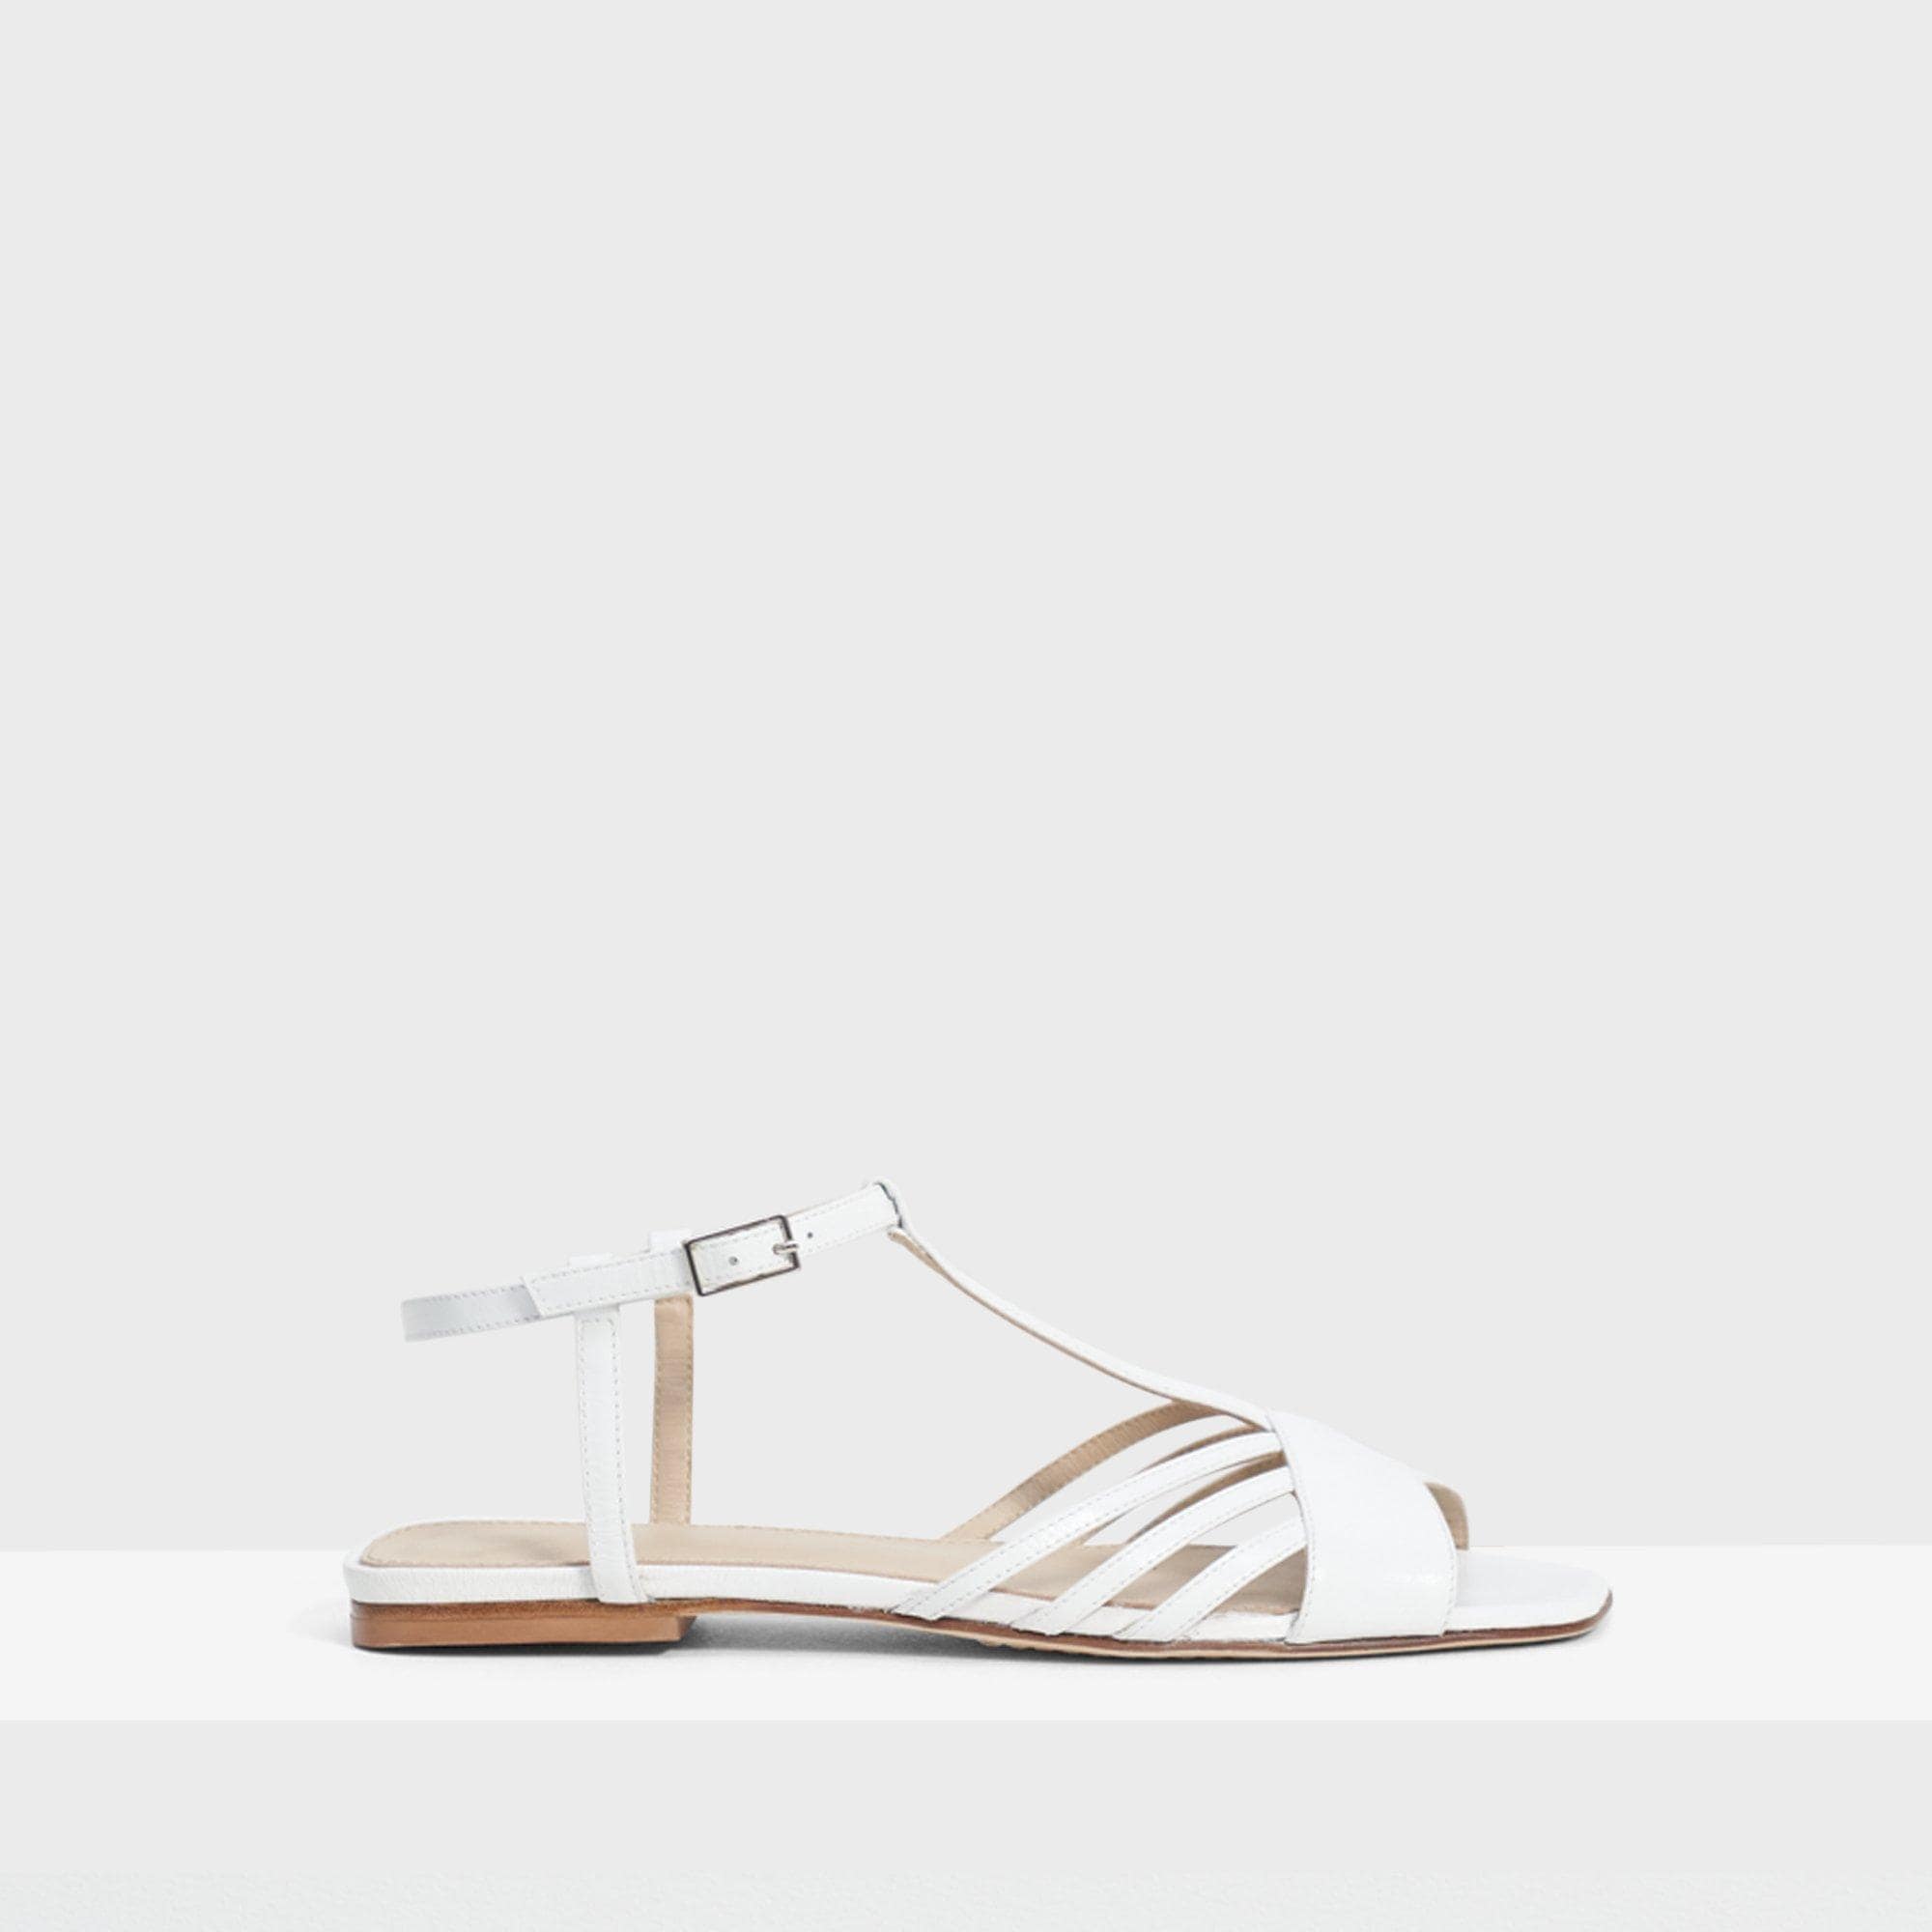 Theory V Strap Sandal in Leather